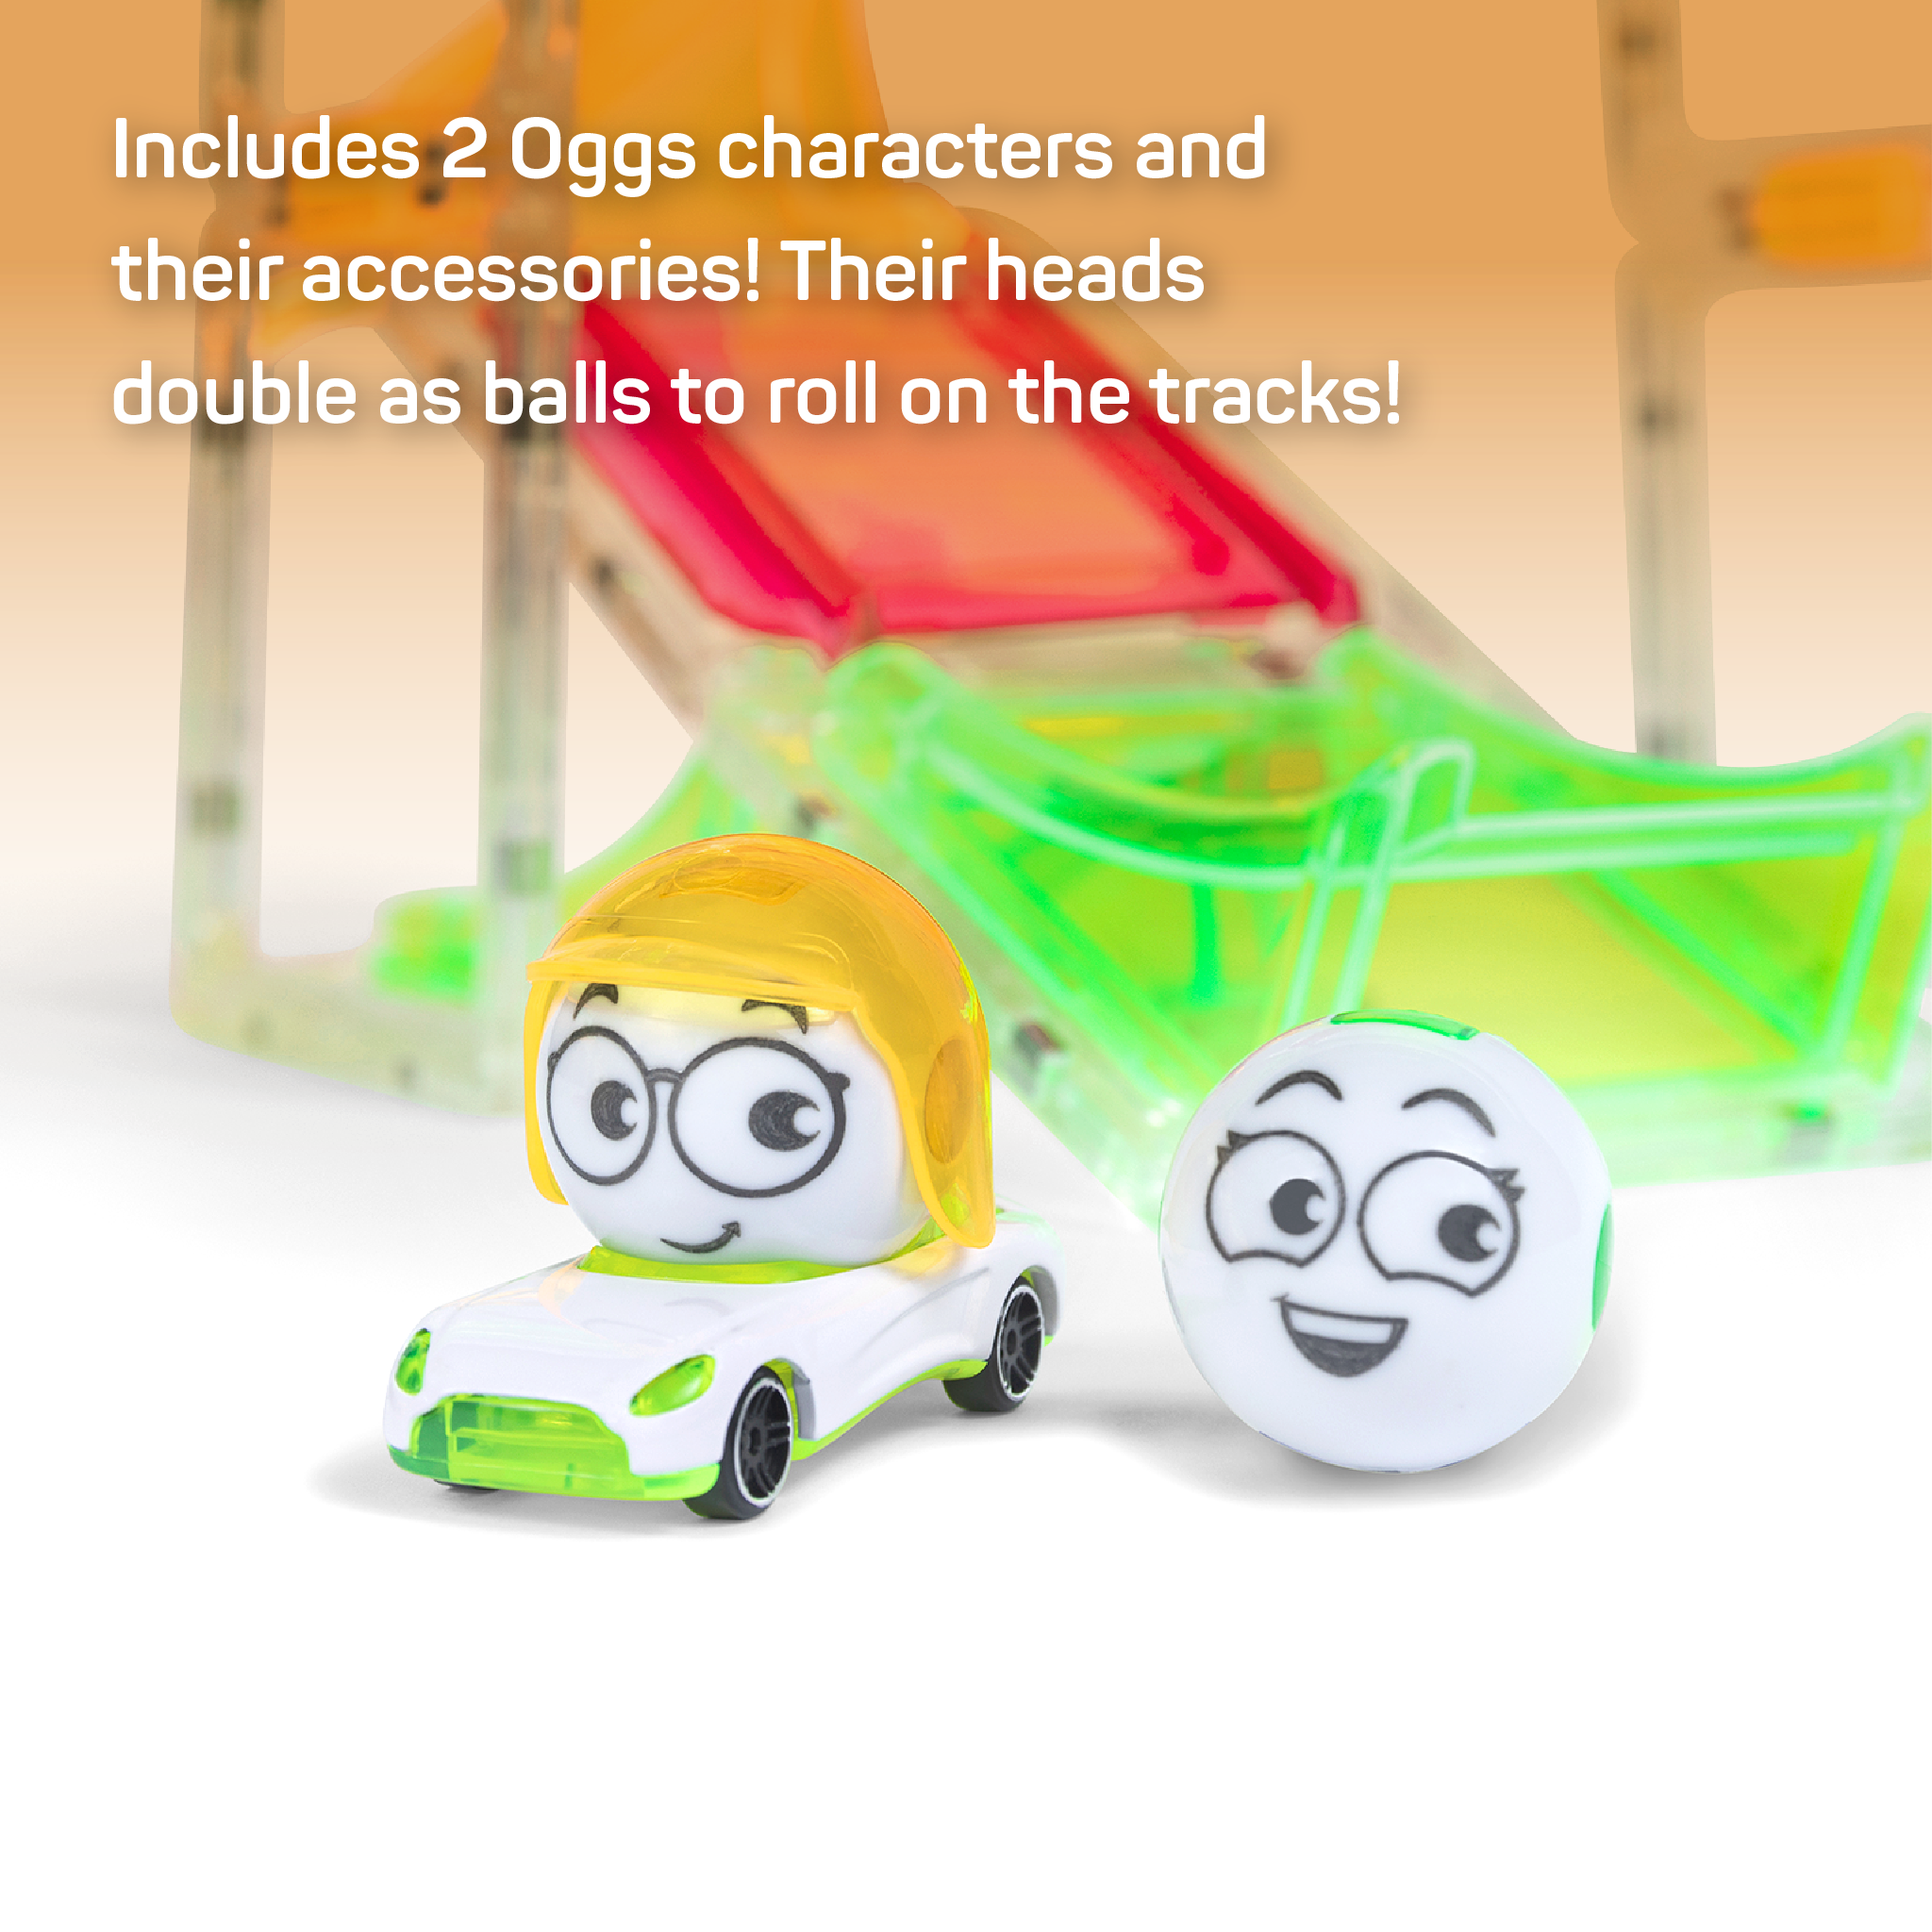 Two Oggs heads, green Oggs car, and racing helmet. Text which reads "Include 2 Oggs characters and their accessories! Their heads double as balls to roll on the tracks!"